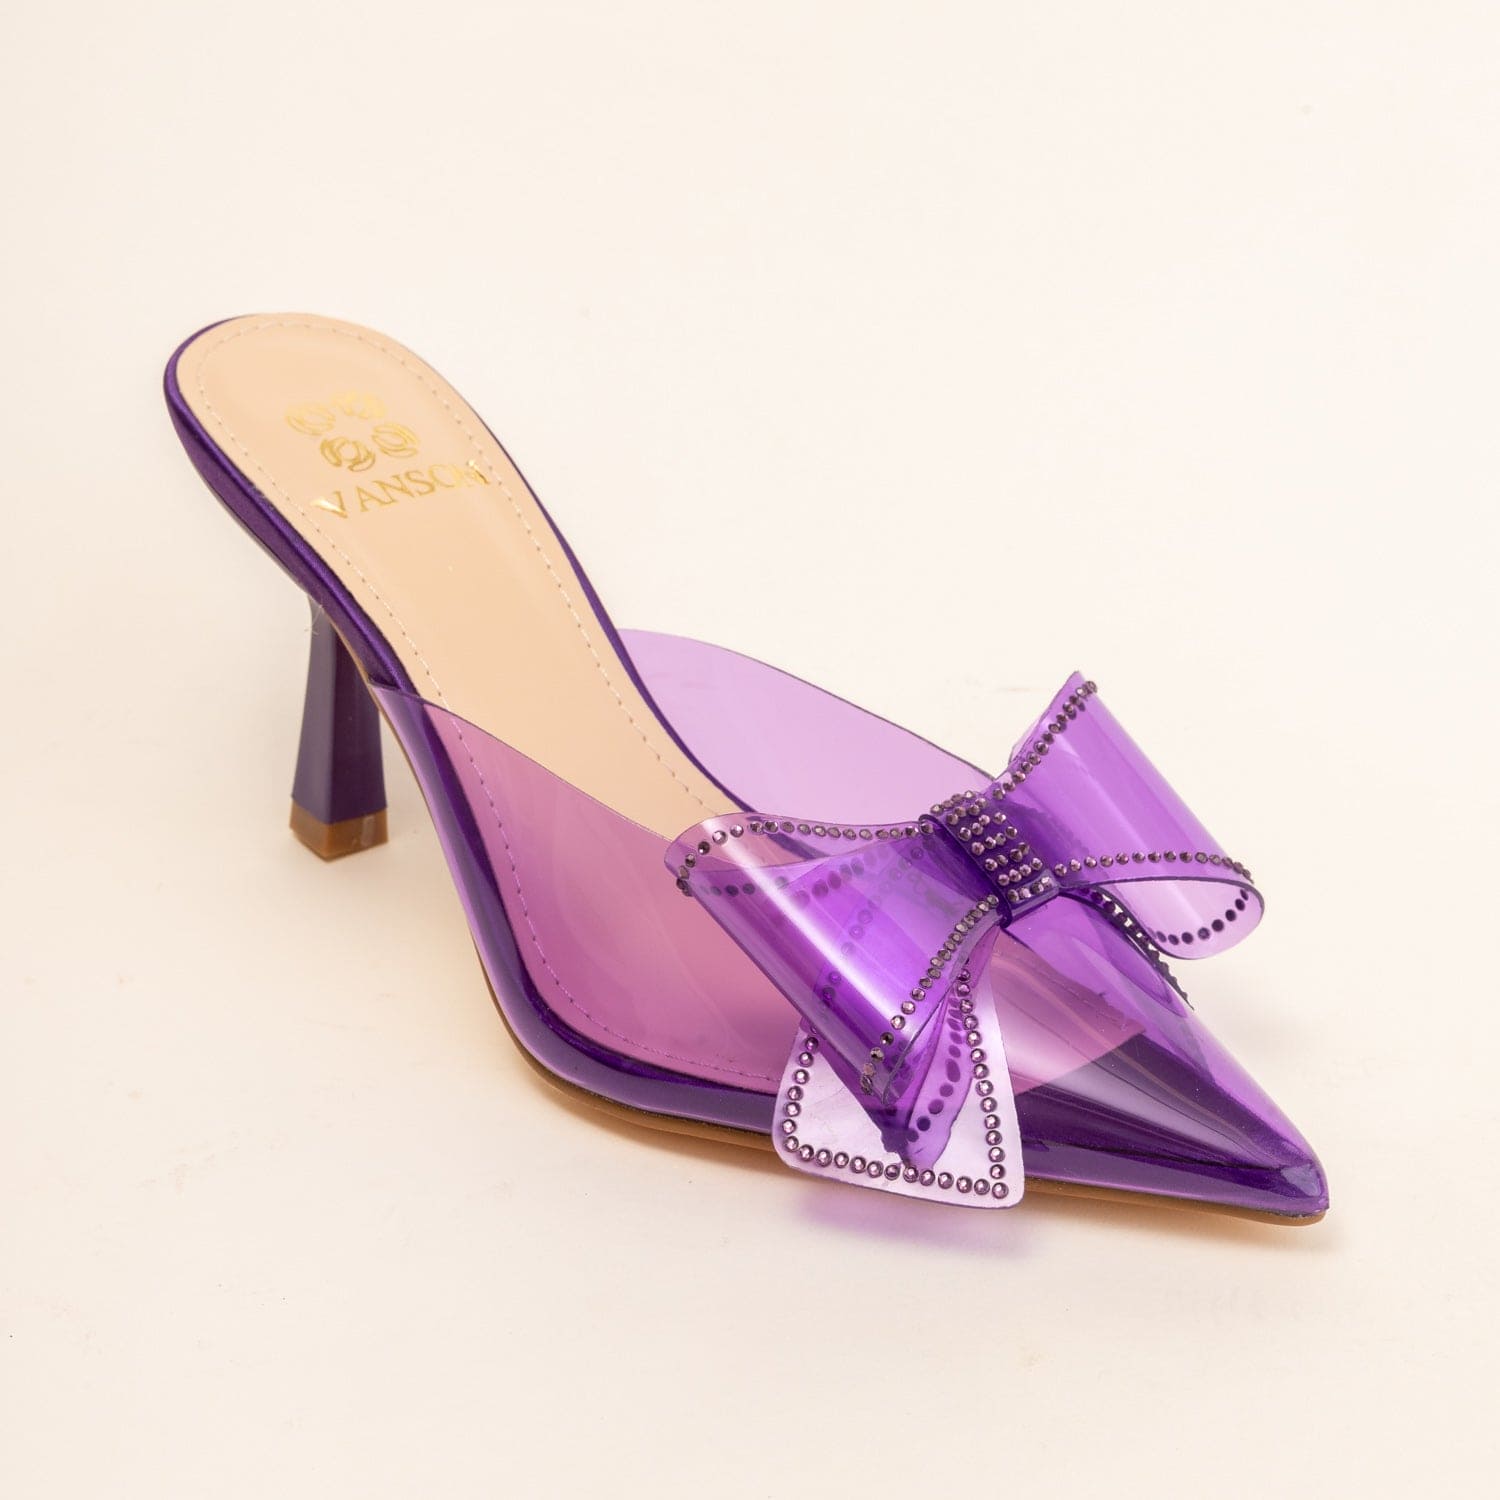 JELLO-Stylish Pumps With Bow in-Purple.